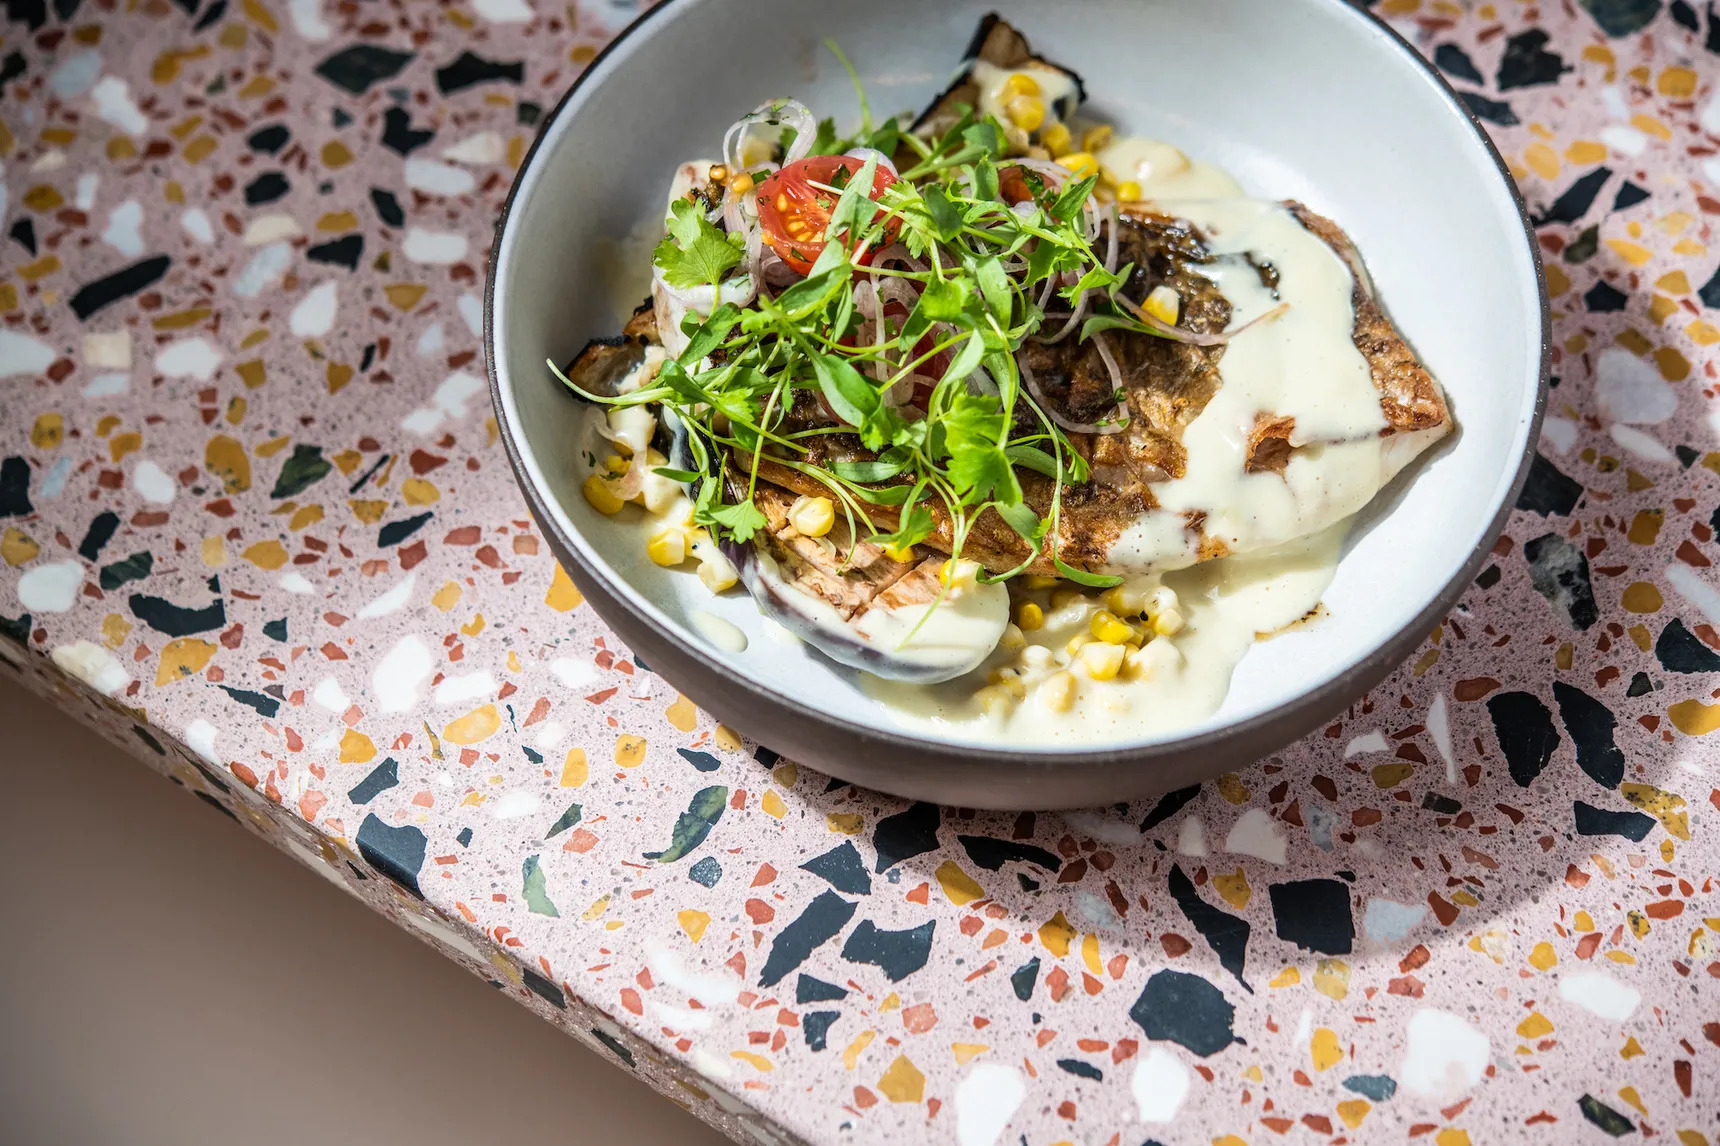 A white bowl of a large filet of skin-on Gulf fish, surrounded by corn maque choux and clams and topped with micro-greens.